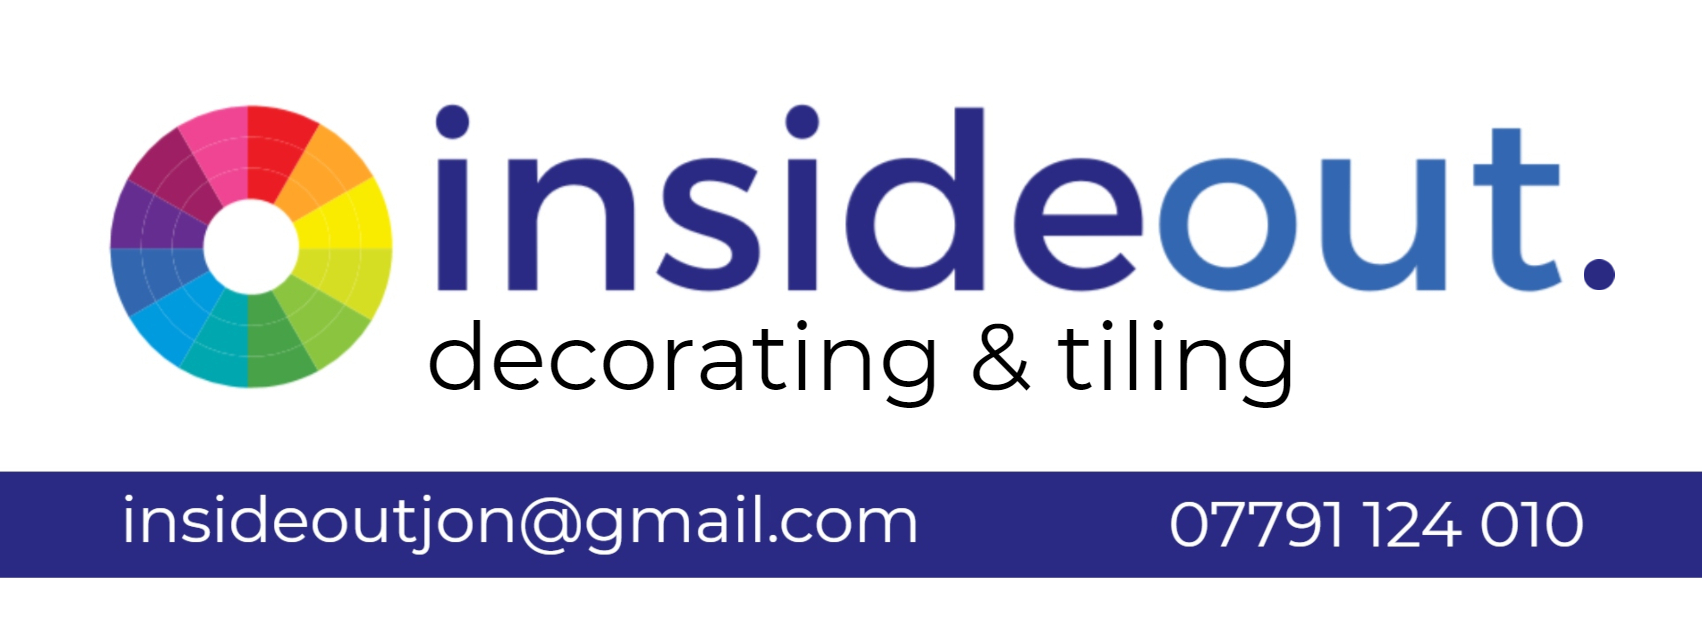 Insideout Decorating & Tiling